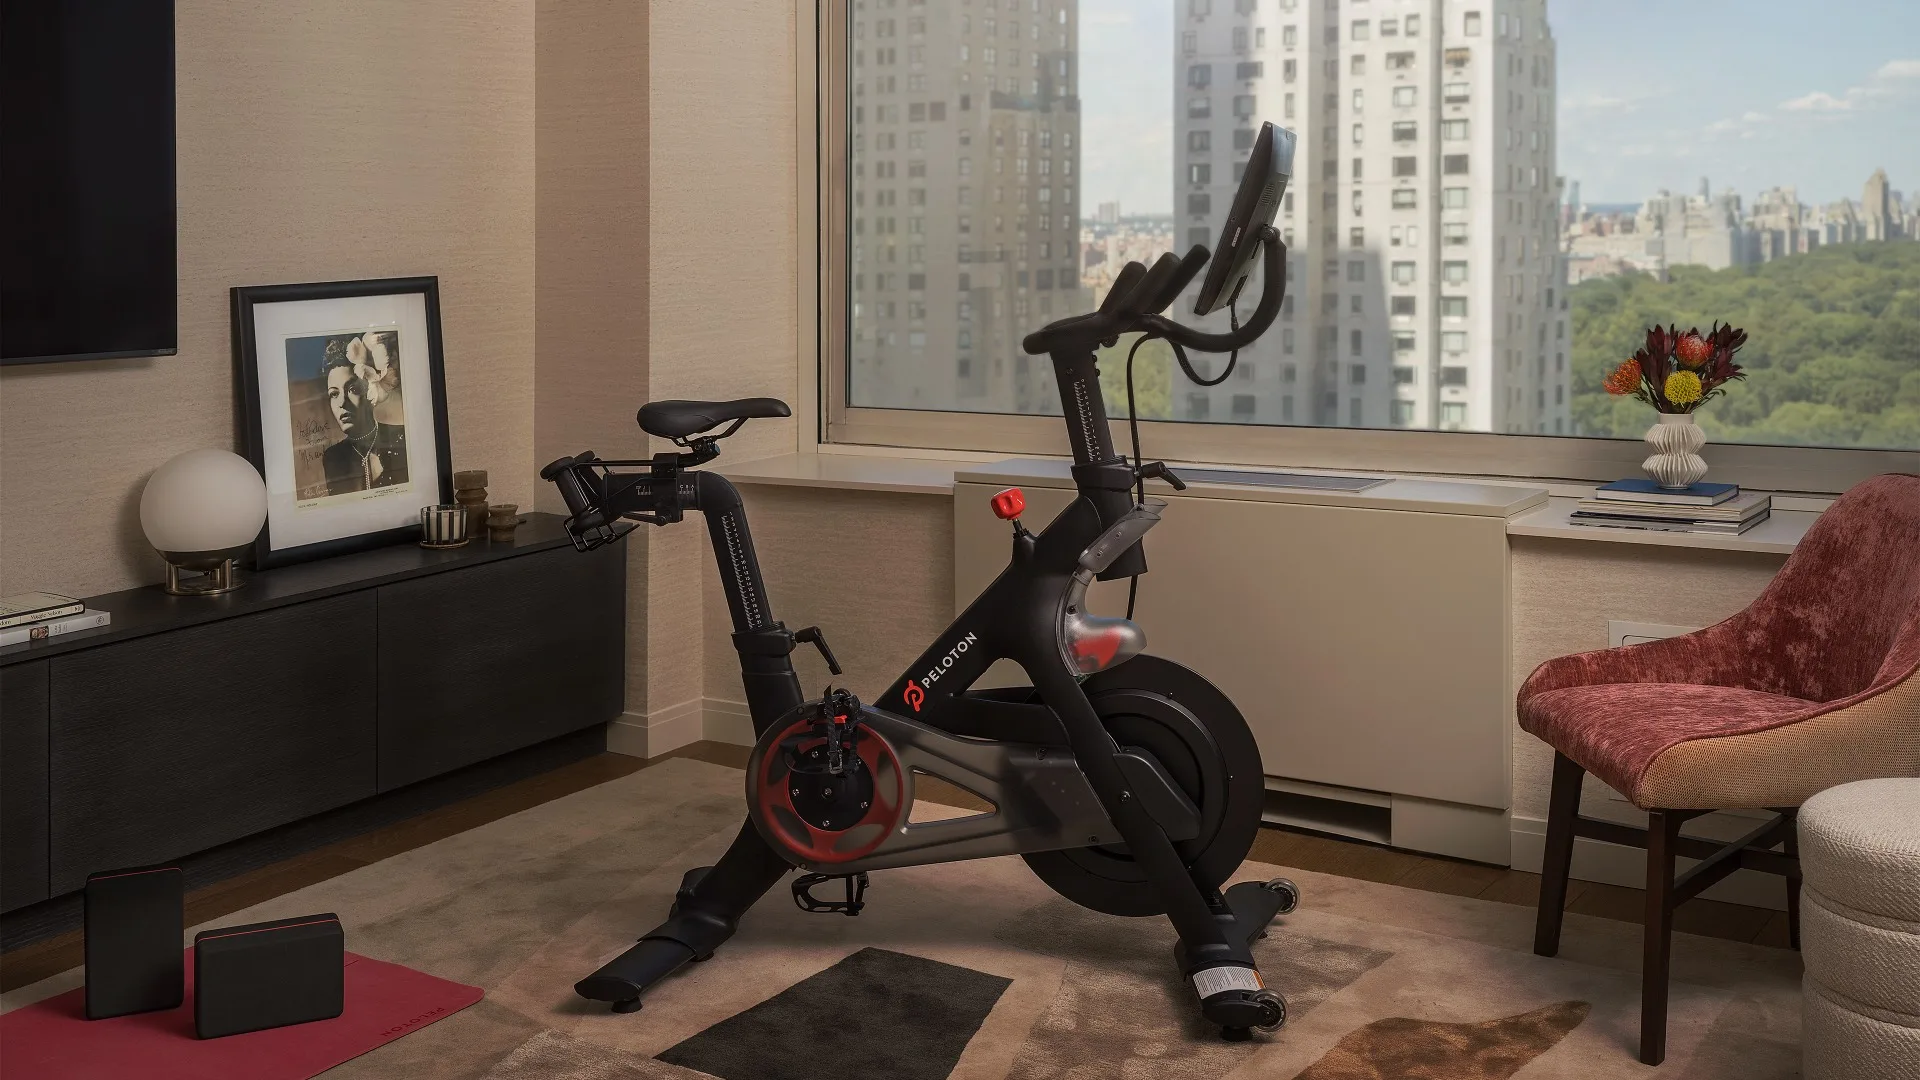 A guestroom at Thompson Hotel featuring a Peloton Bike